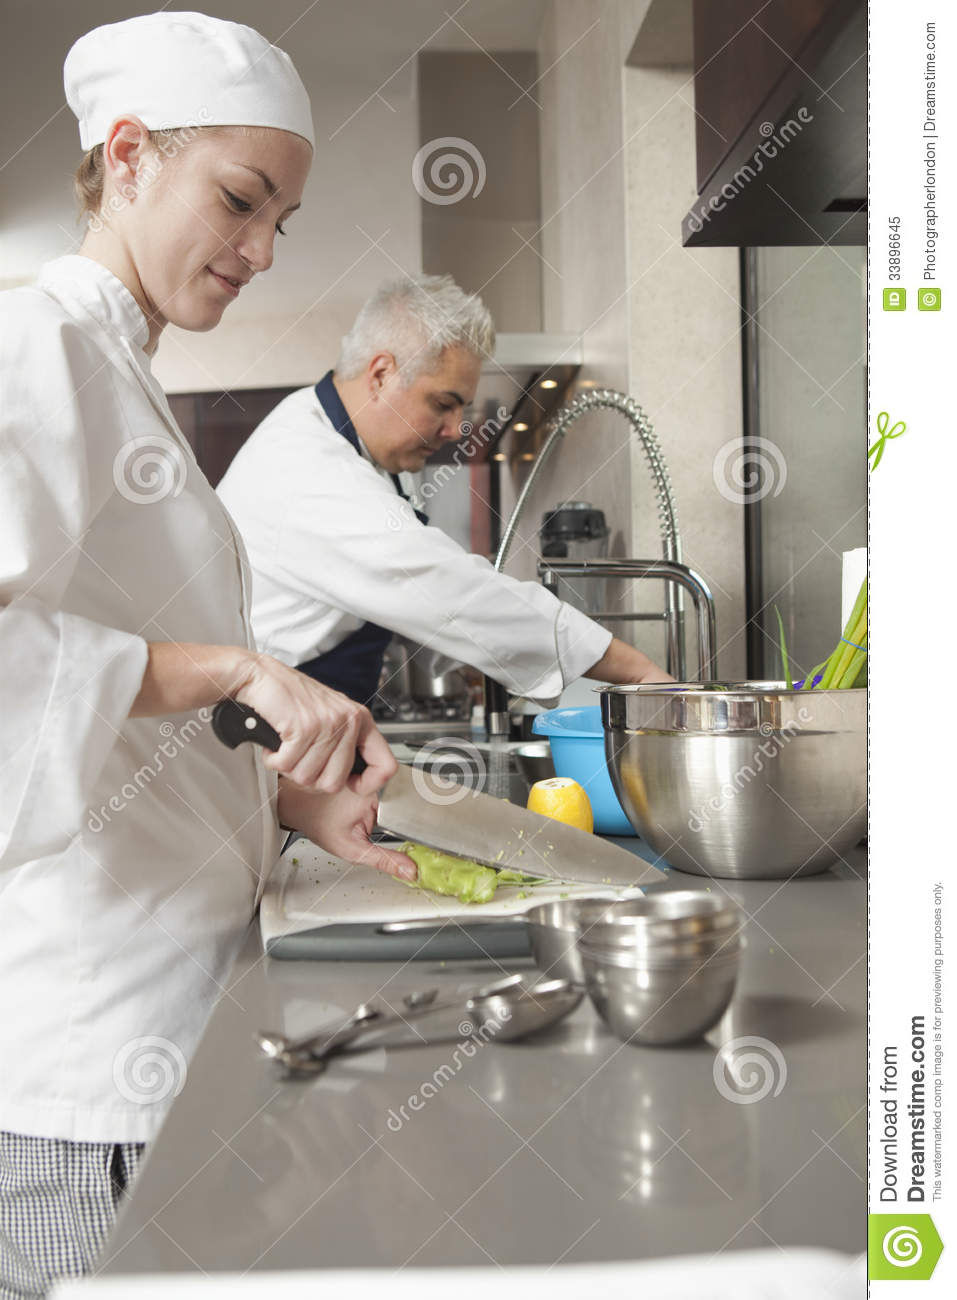 Chefs Working In Commercial Kitchen Royalty Free Stock Photo   Image    